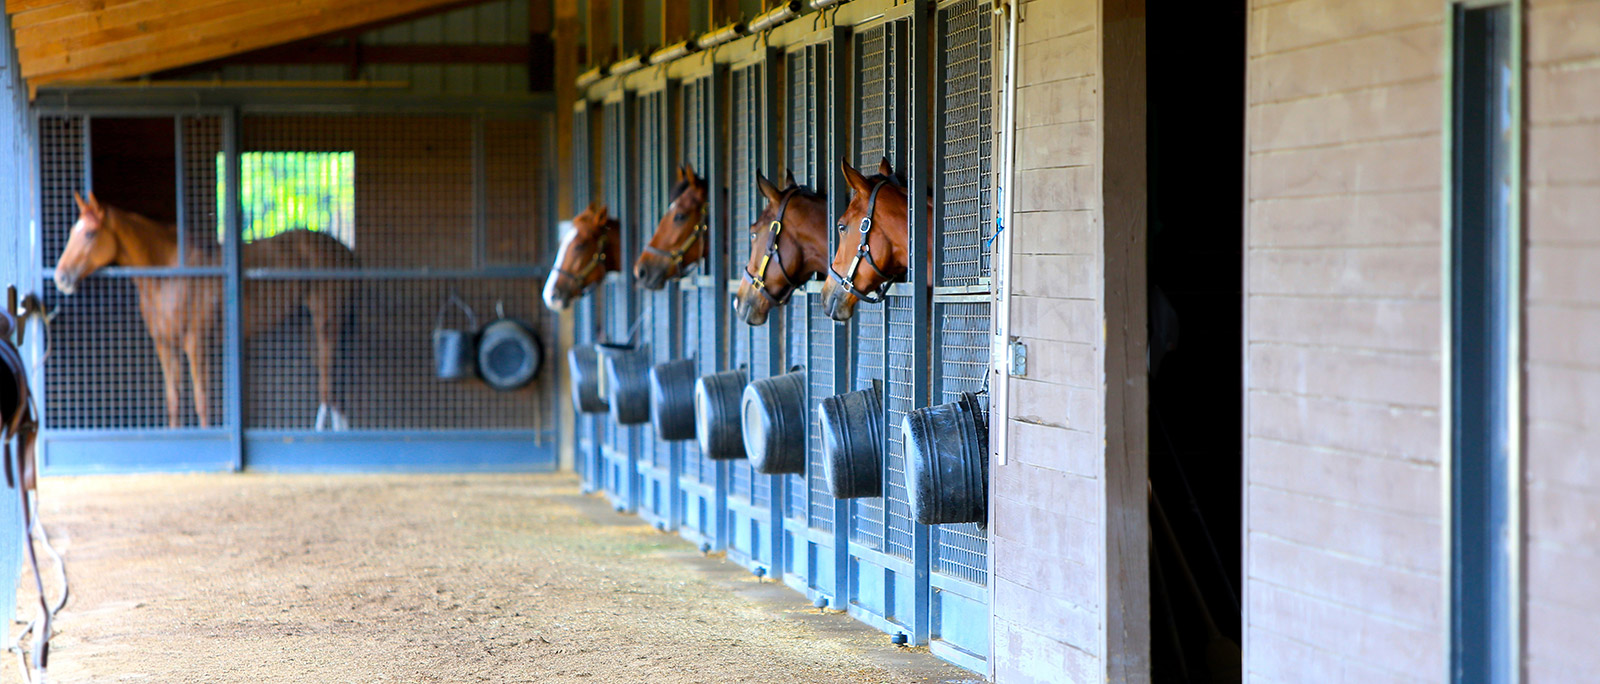 Horses looking out of their stalls